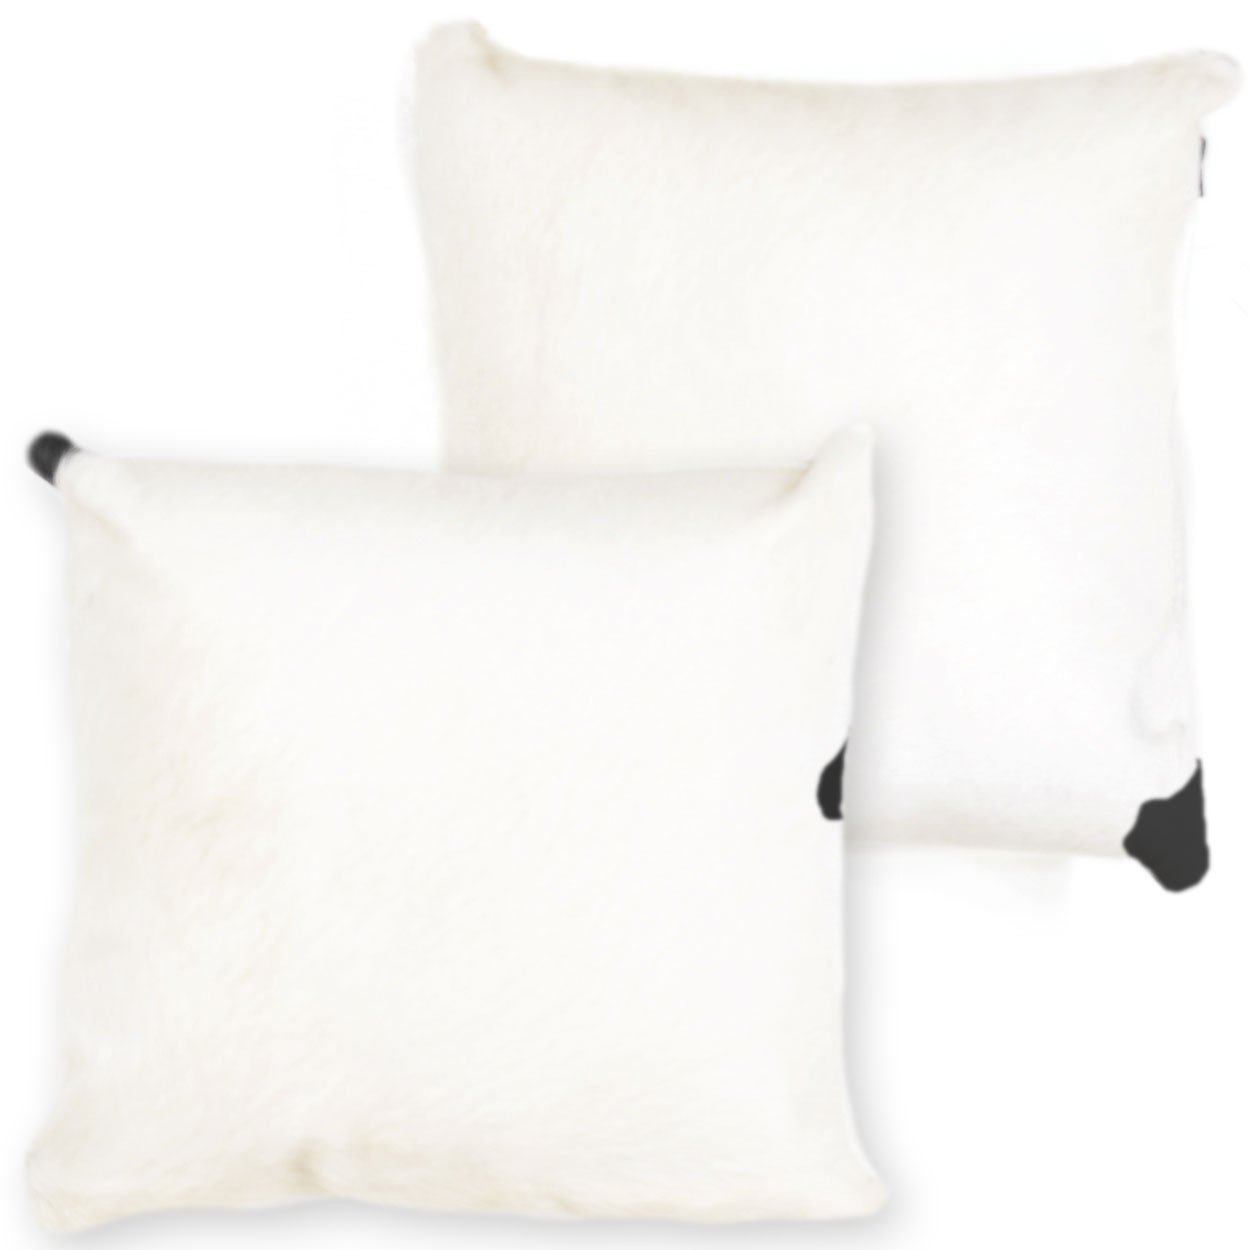 322100 - 15in Premium Cowhide Pillow - Mostly White on Both Sides